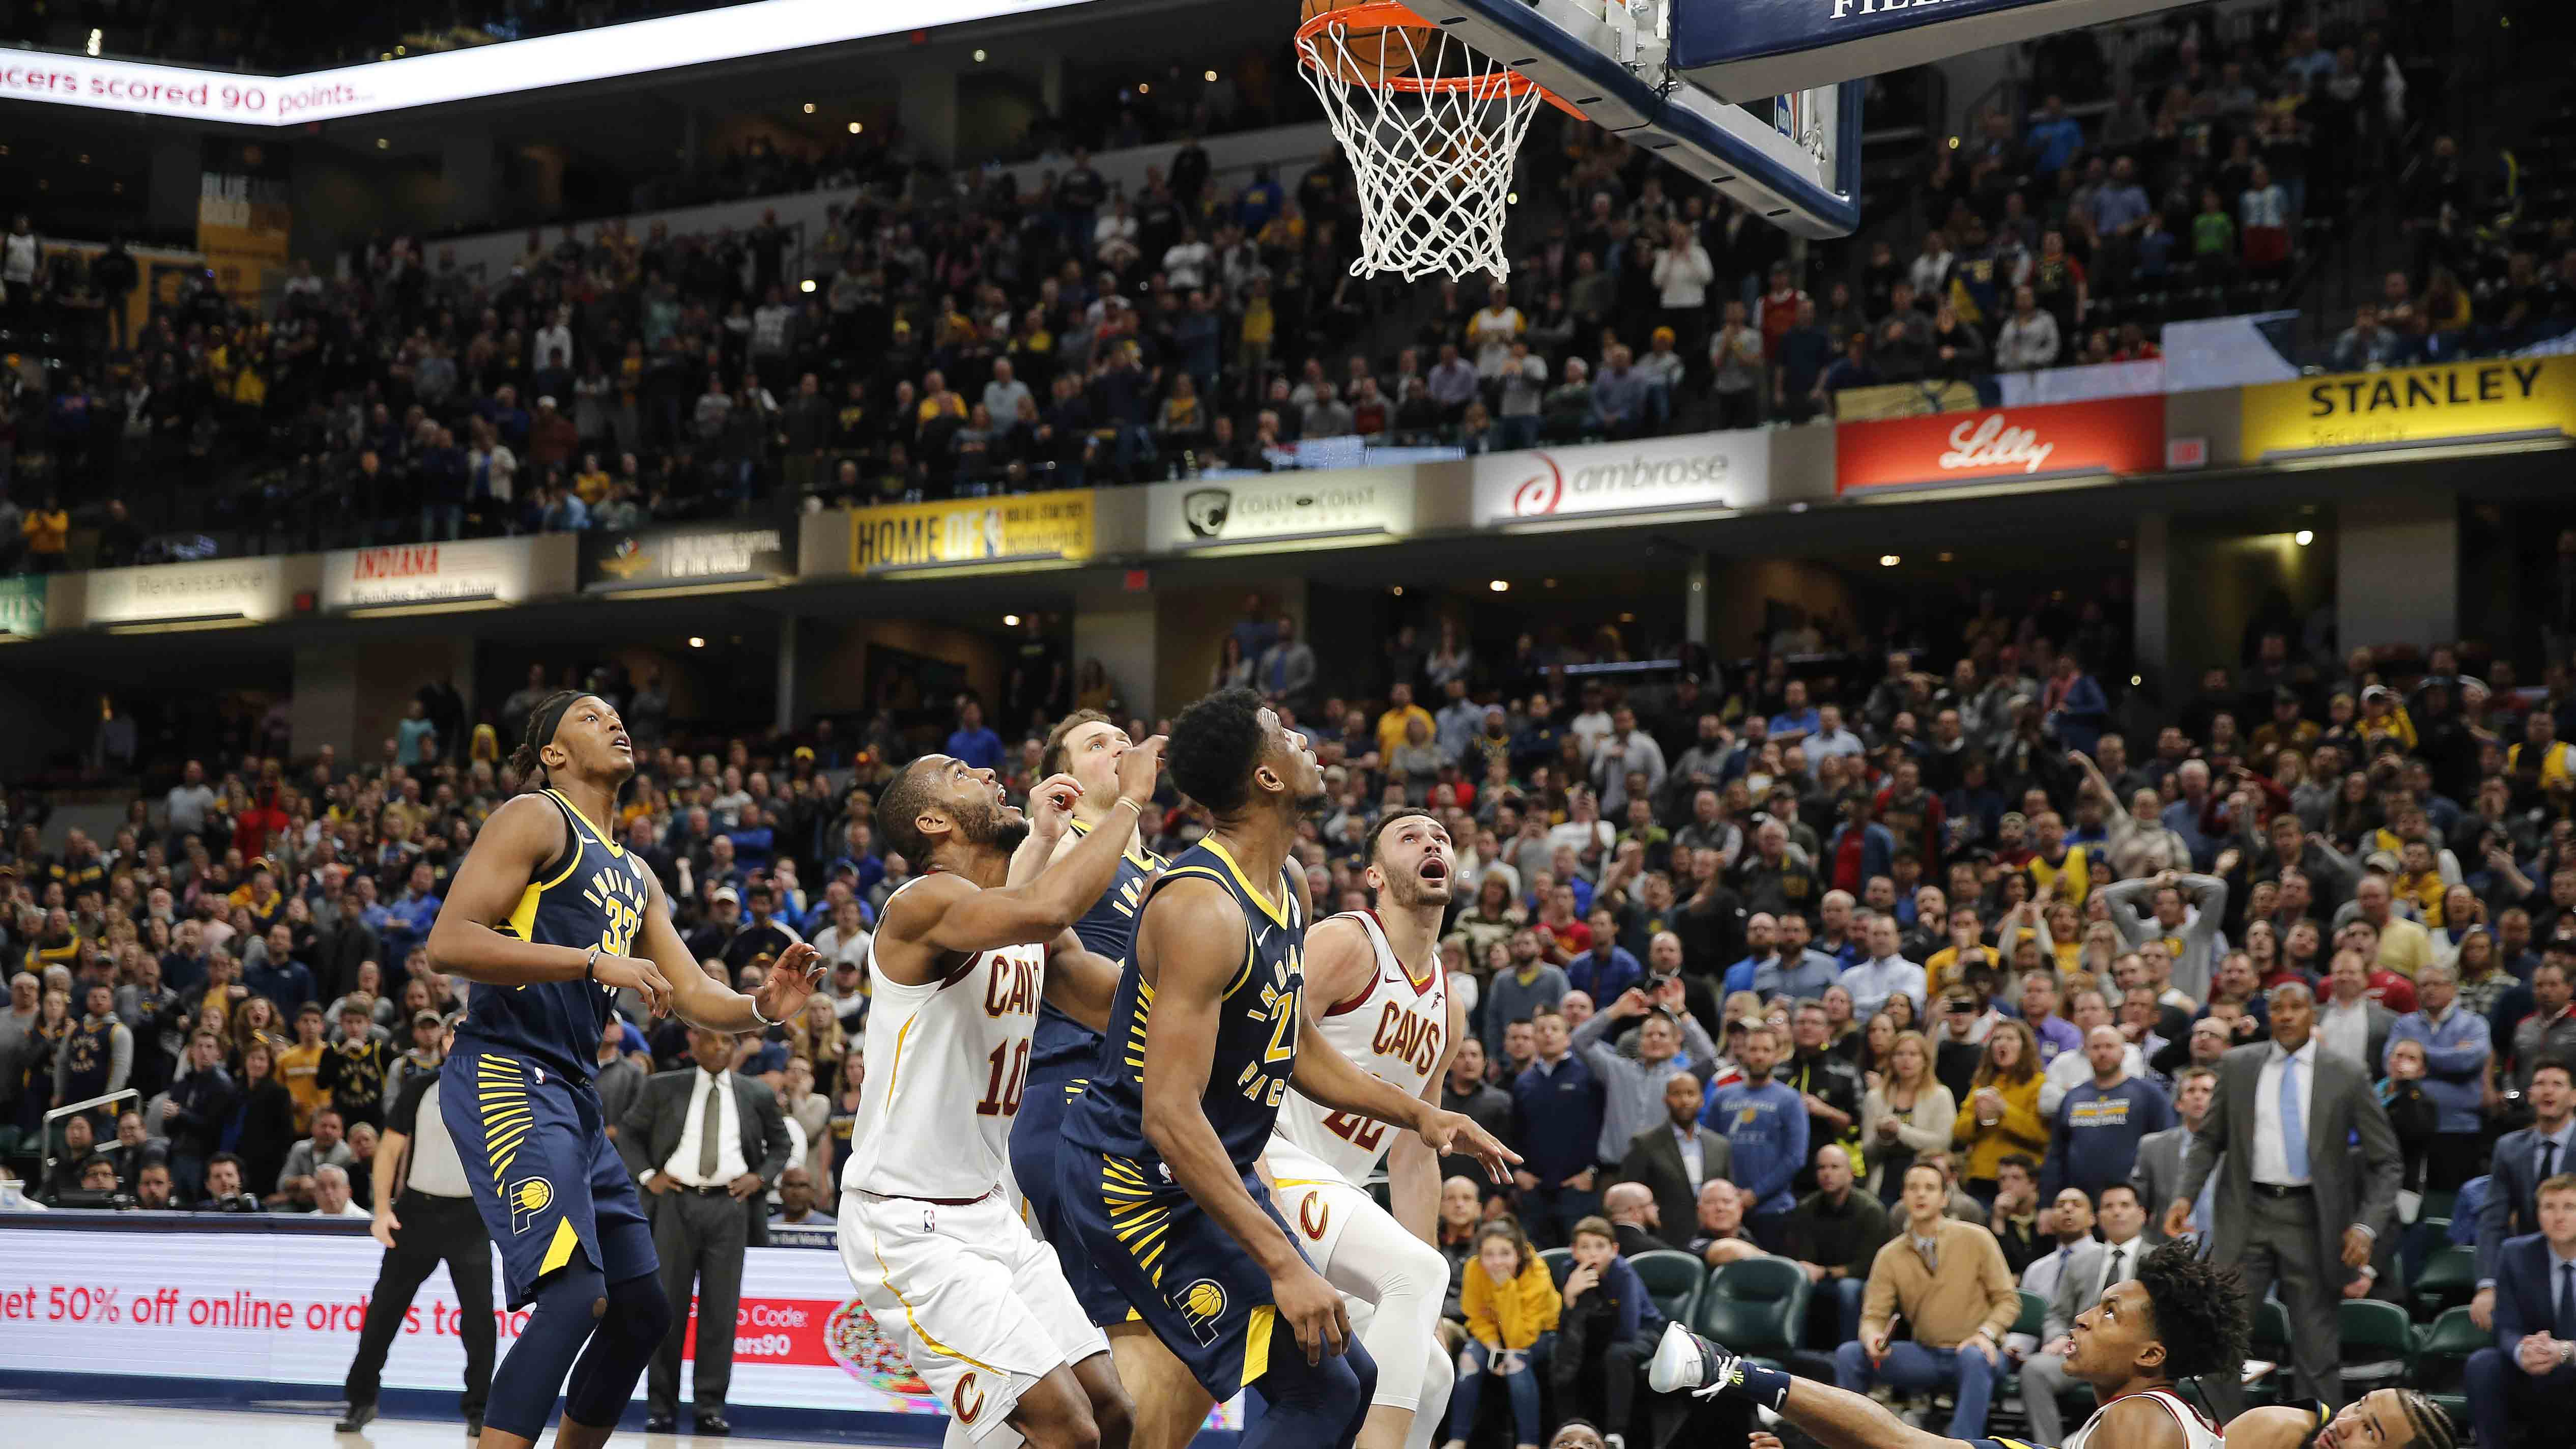 Pacers get blindsided, lose 92-91 as Cavs get last-second tip-in